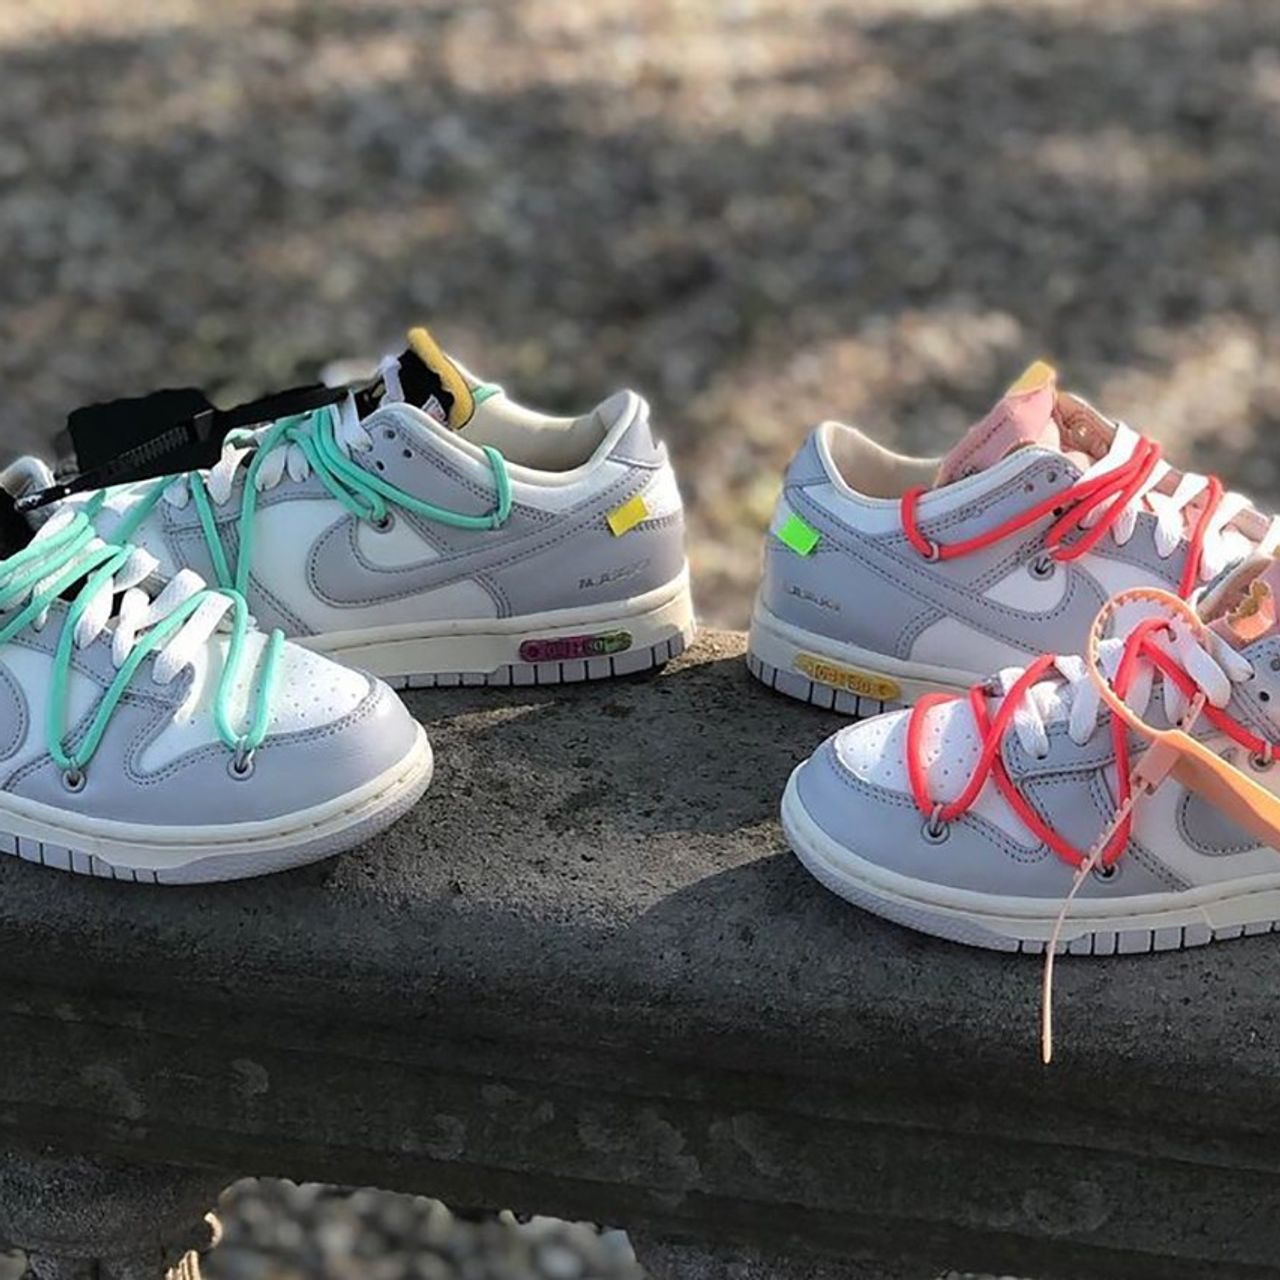 lippen val Slink Winners of 'The 50' Off-White x Nike Dunk Lows Won't Be Able to Choose  Colourway - Sneaker Freaker